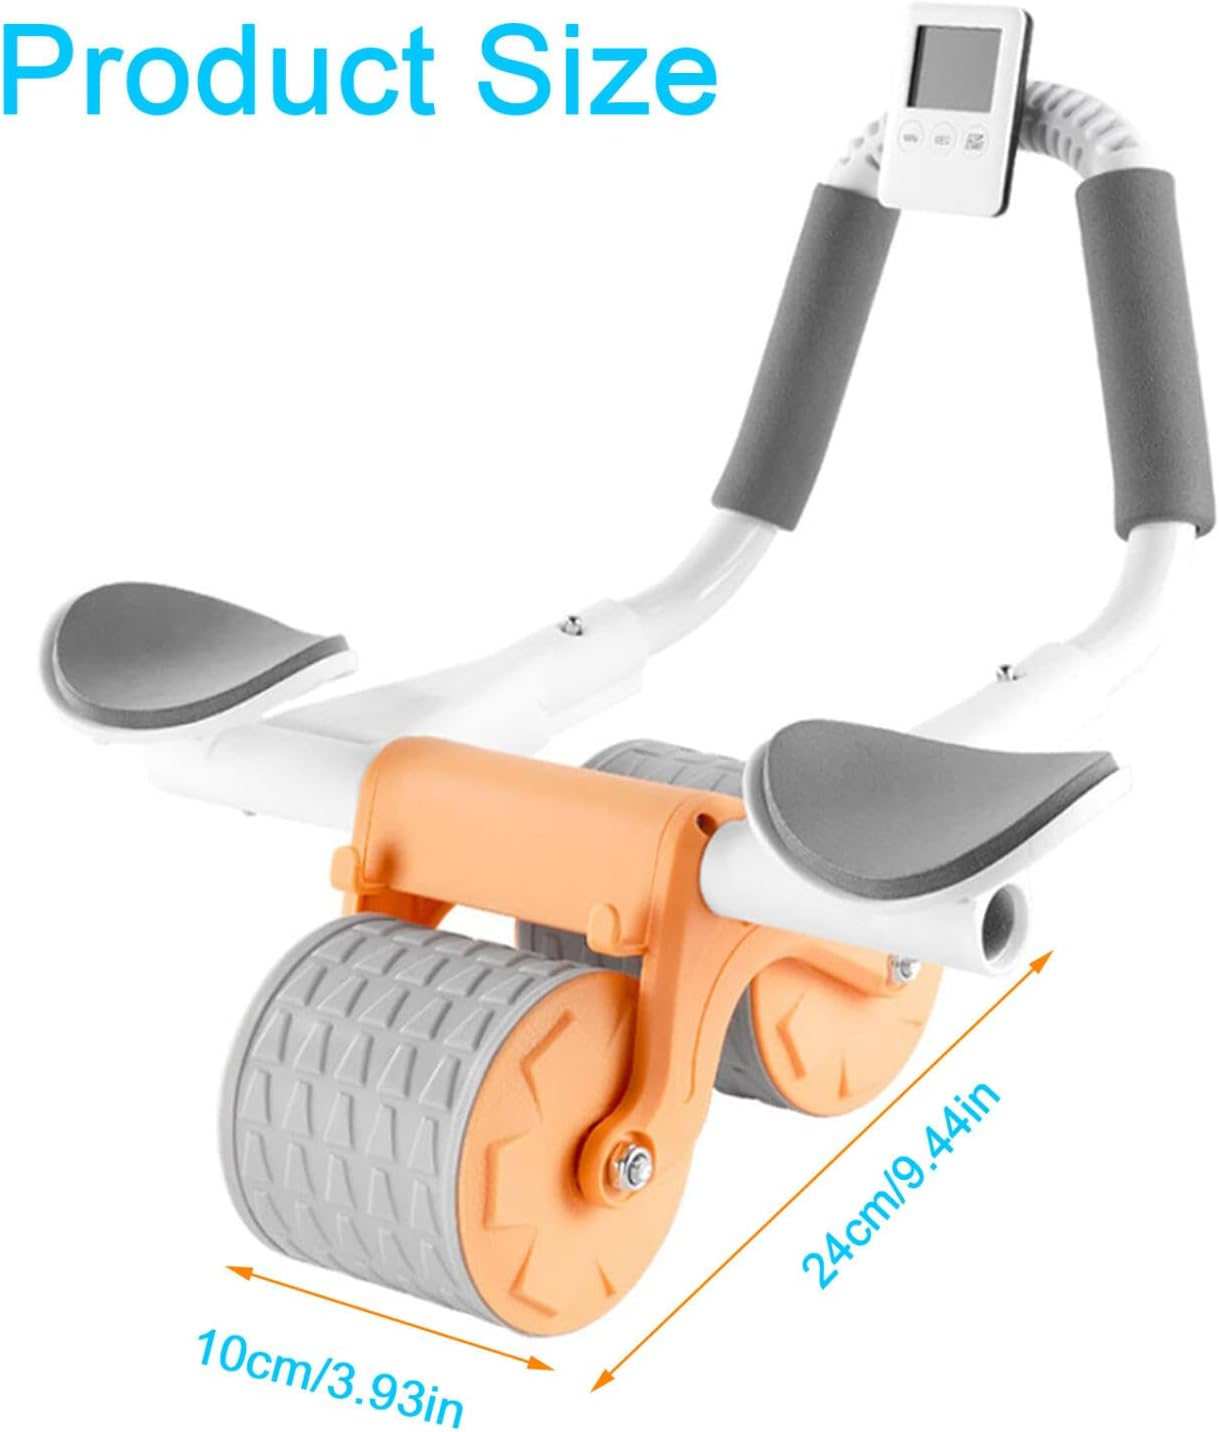 2023 New Ab Roller Wheel with Knee Mat Timer, Automatic Rebound Abdominal Wheel, Ab Abdominal Exercise Roller with Elbow Support, Abs Workout Equipment Ab Exercise Roller for Women Men